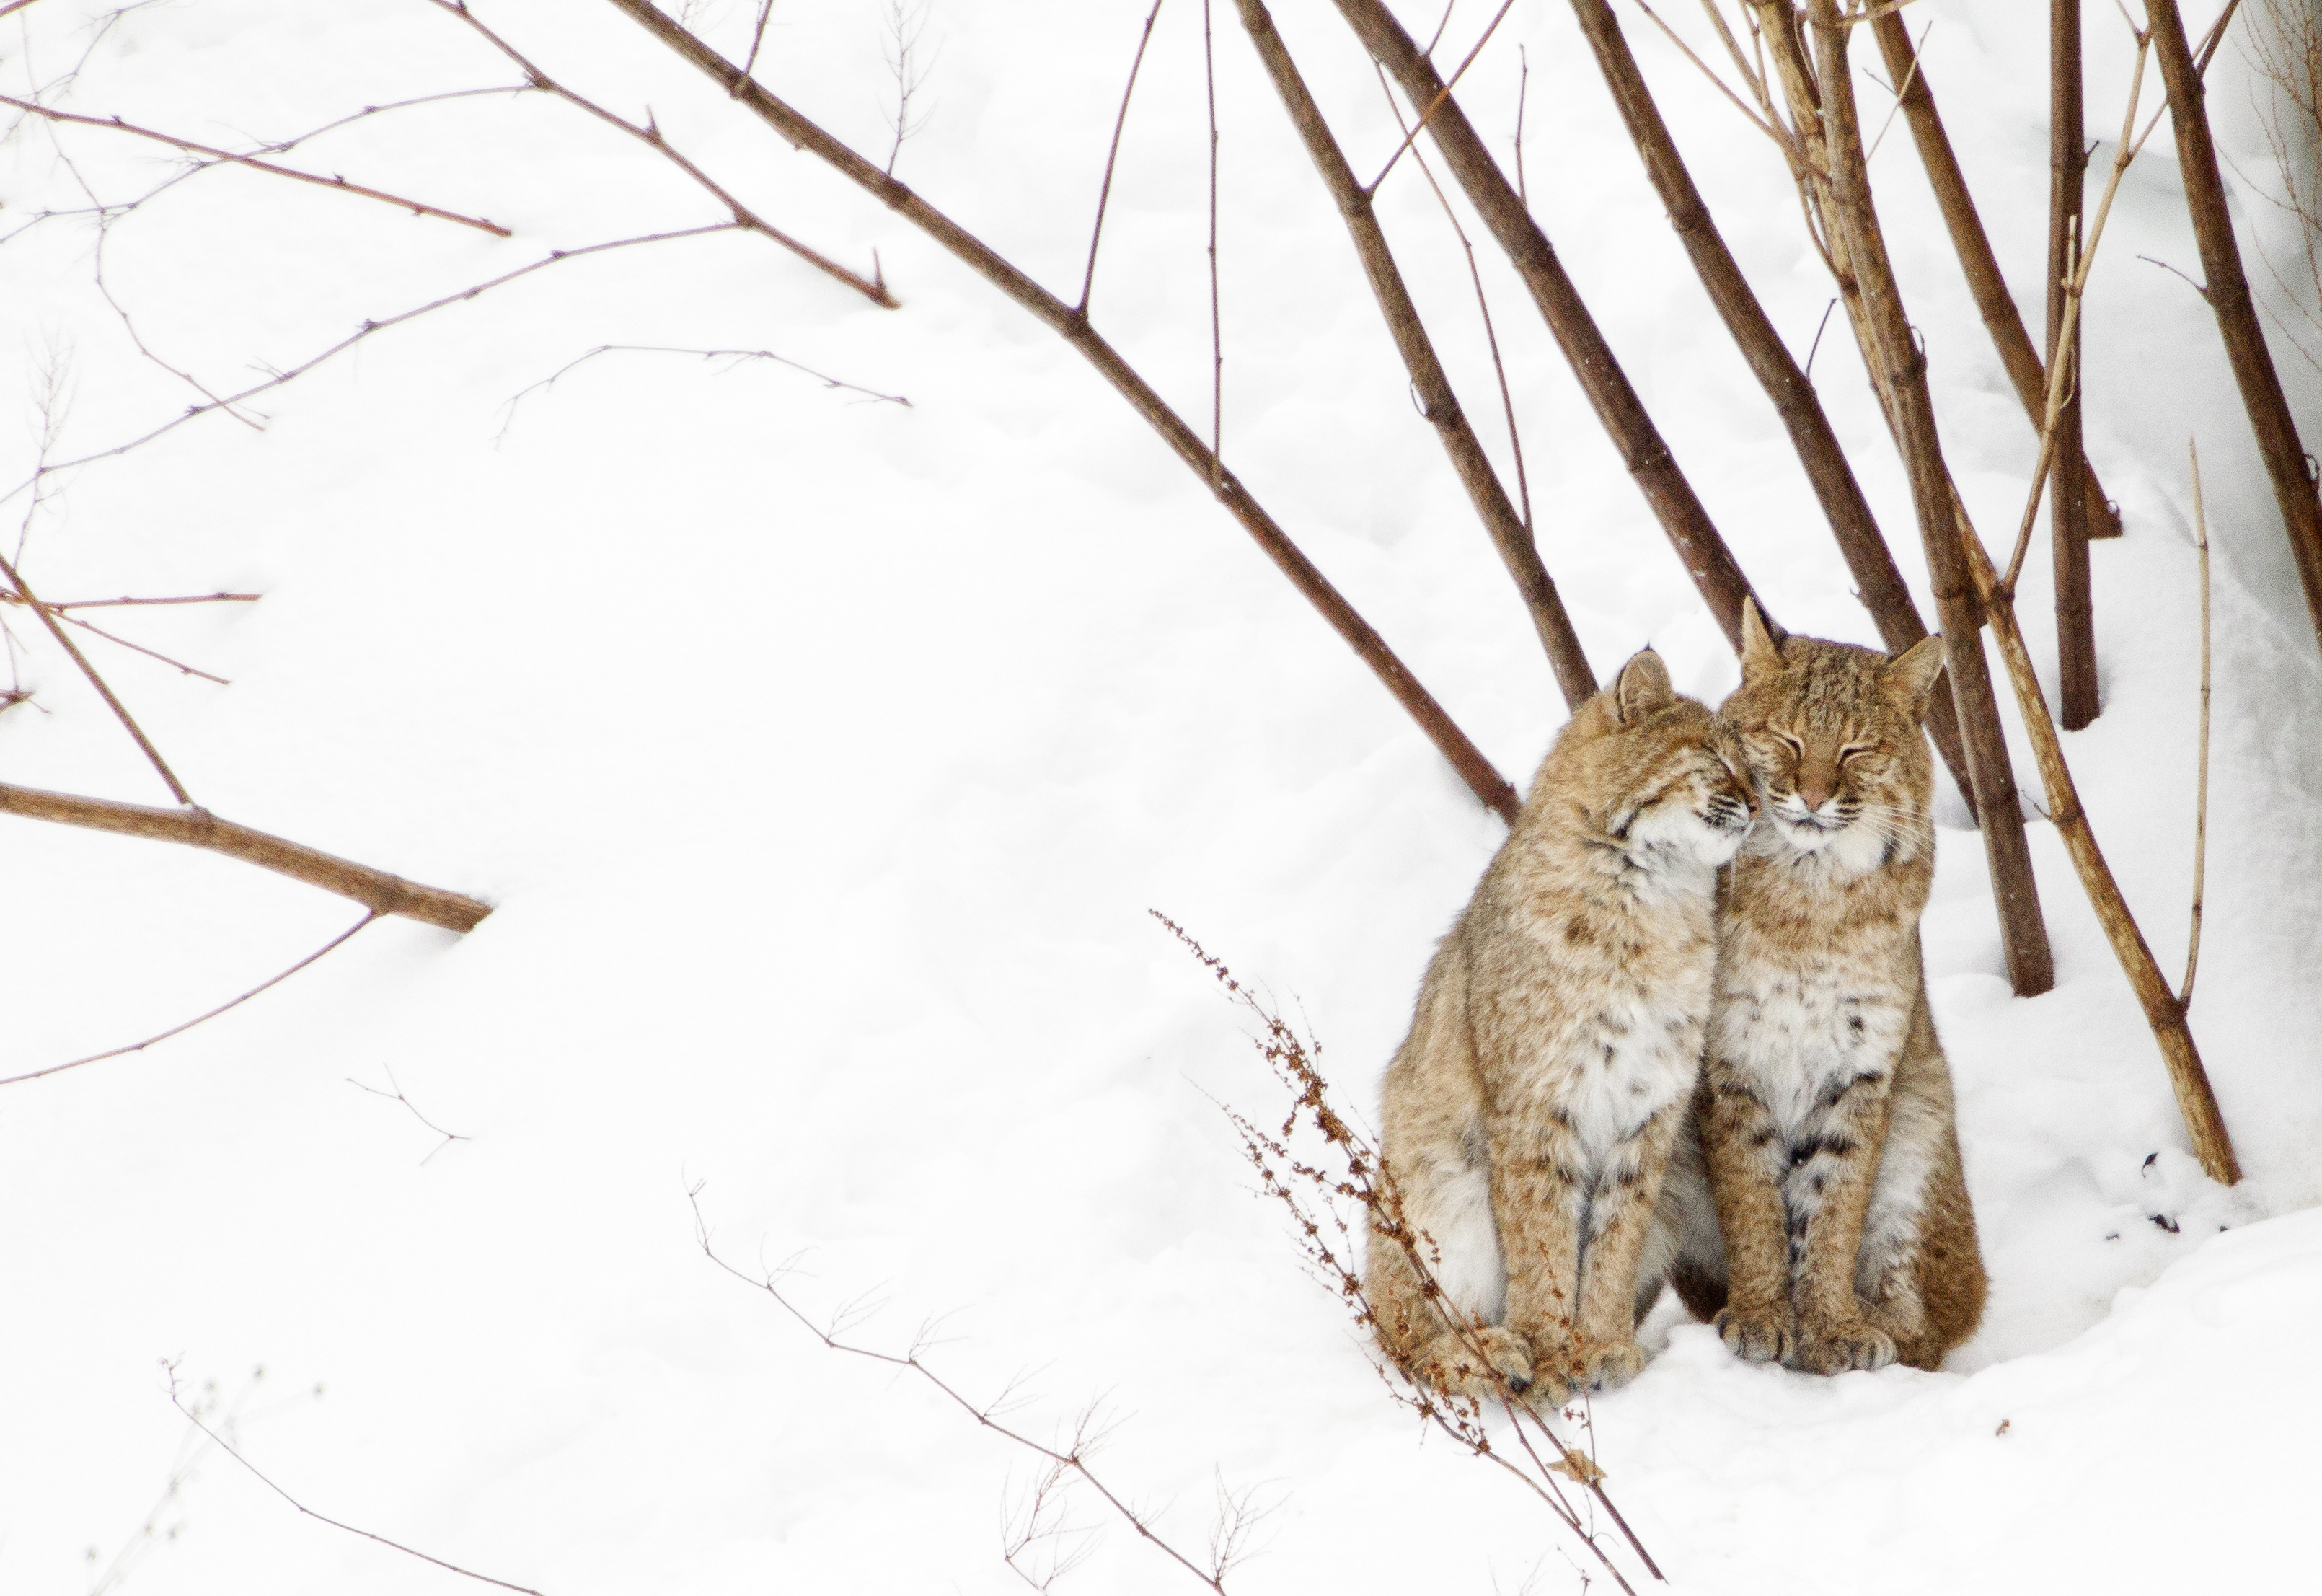 TWo bobcats nuzzling in snow.